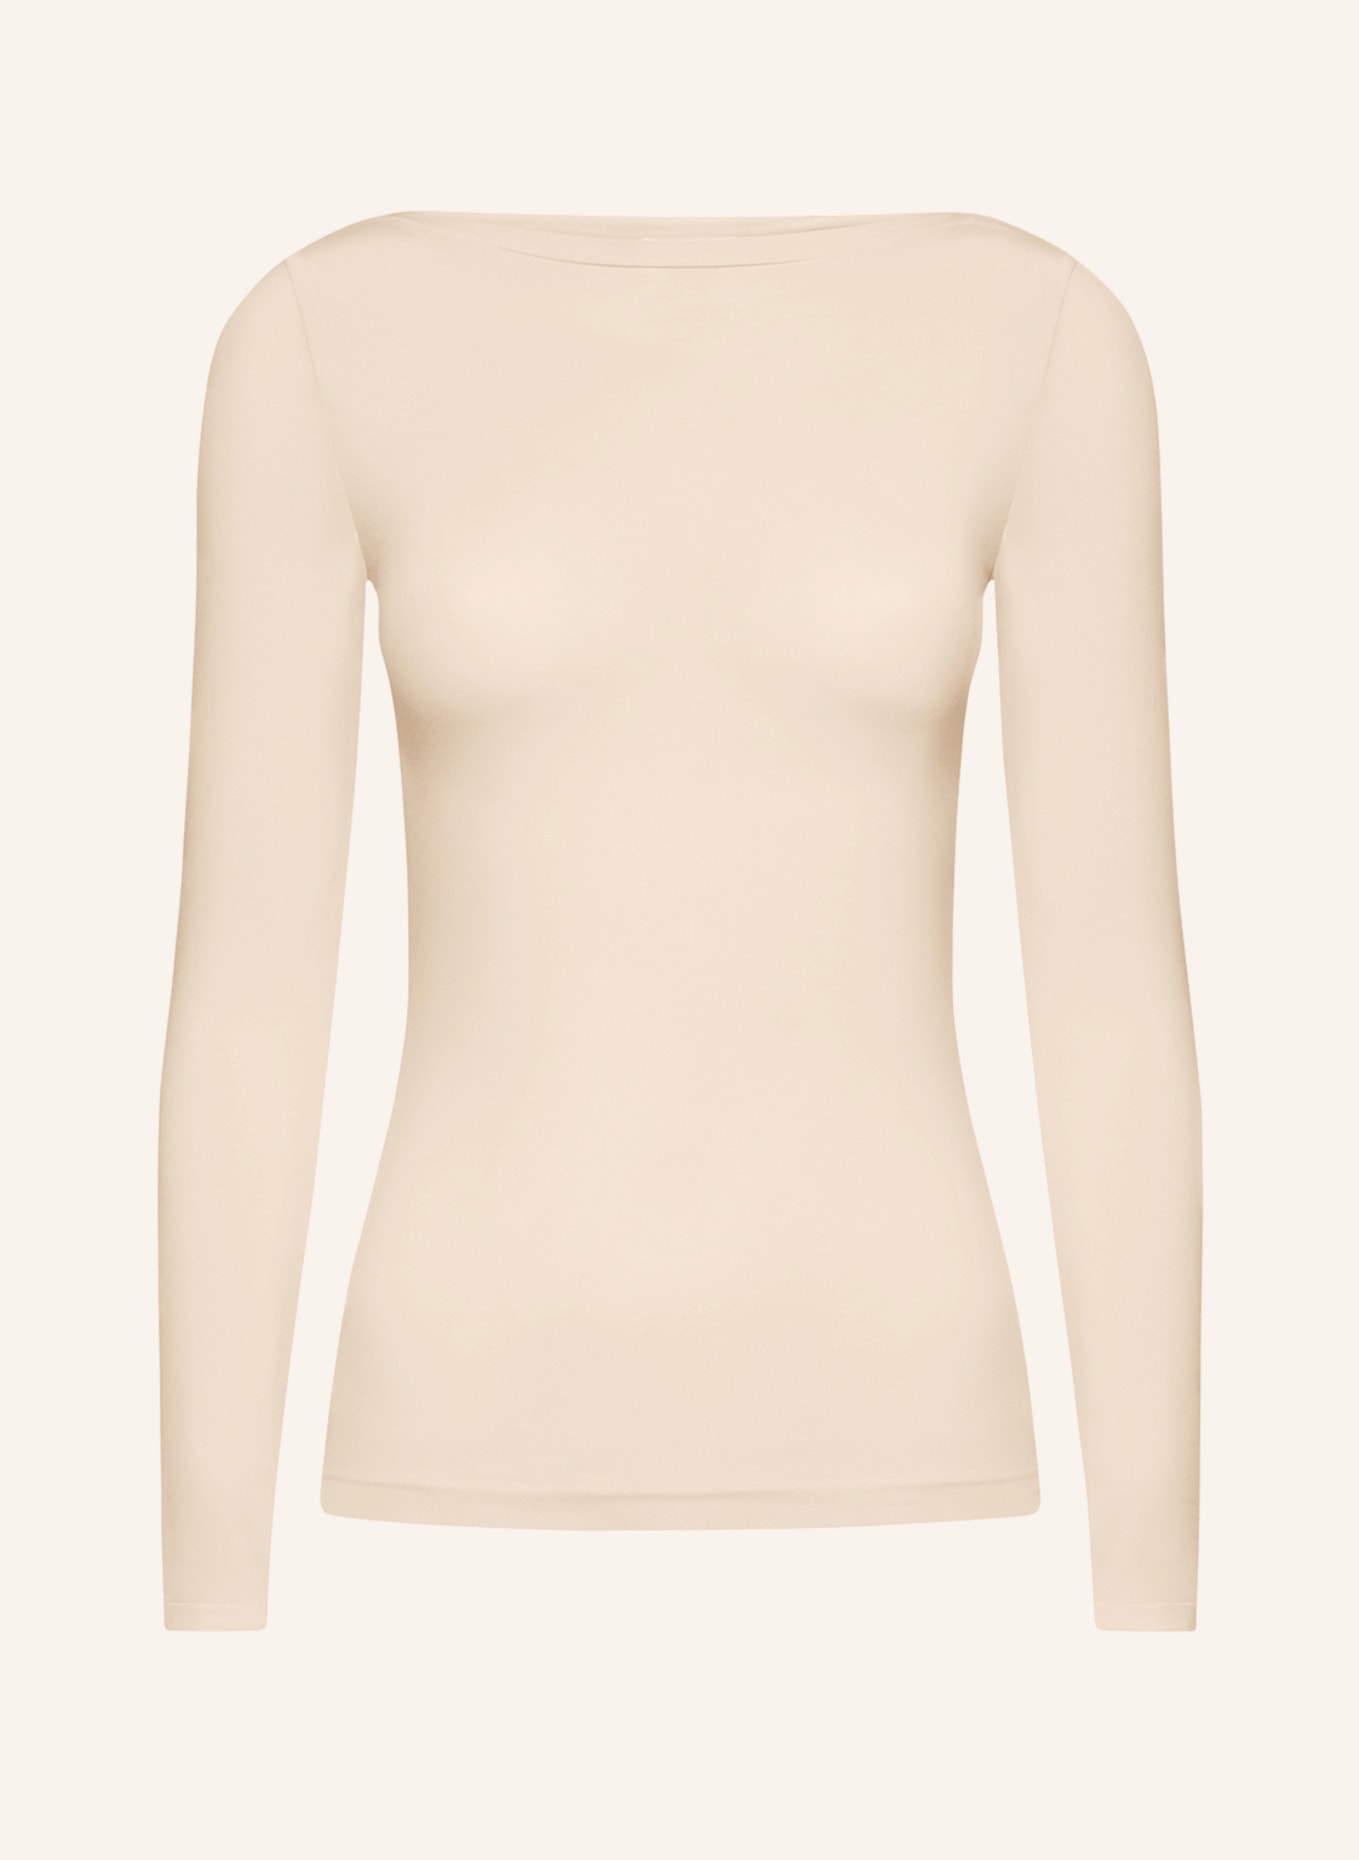 Wolford Top BUENOS AIRES, Farbe: BEIGE (Bild 1)